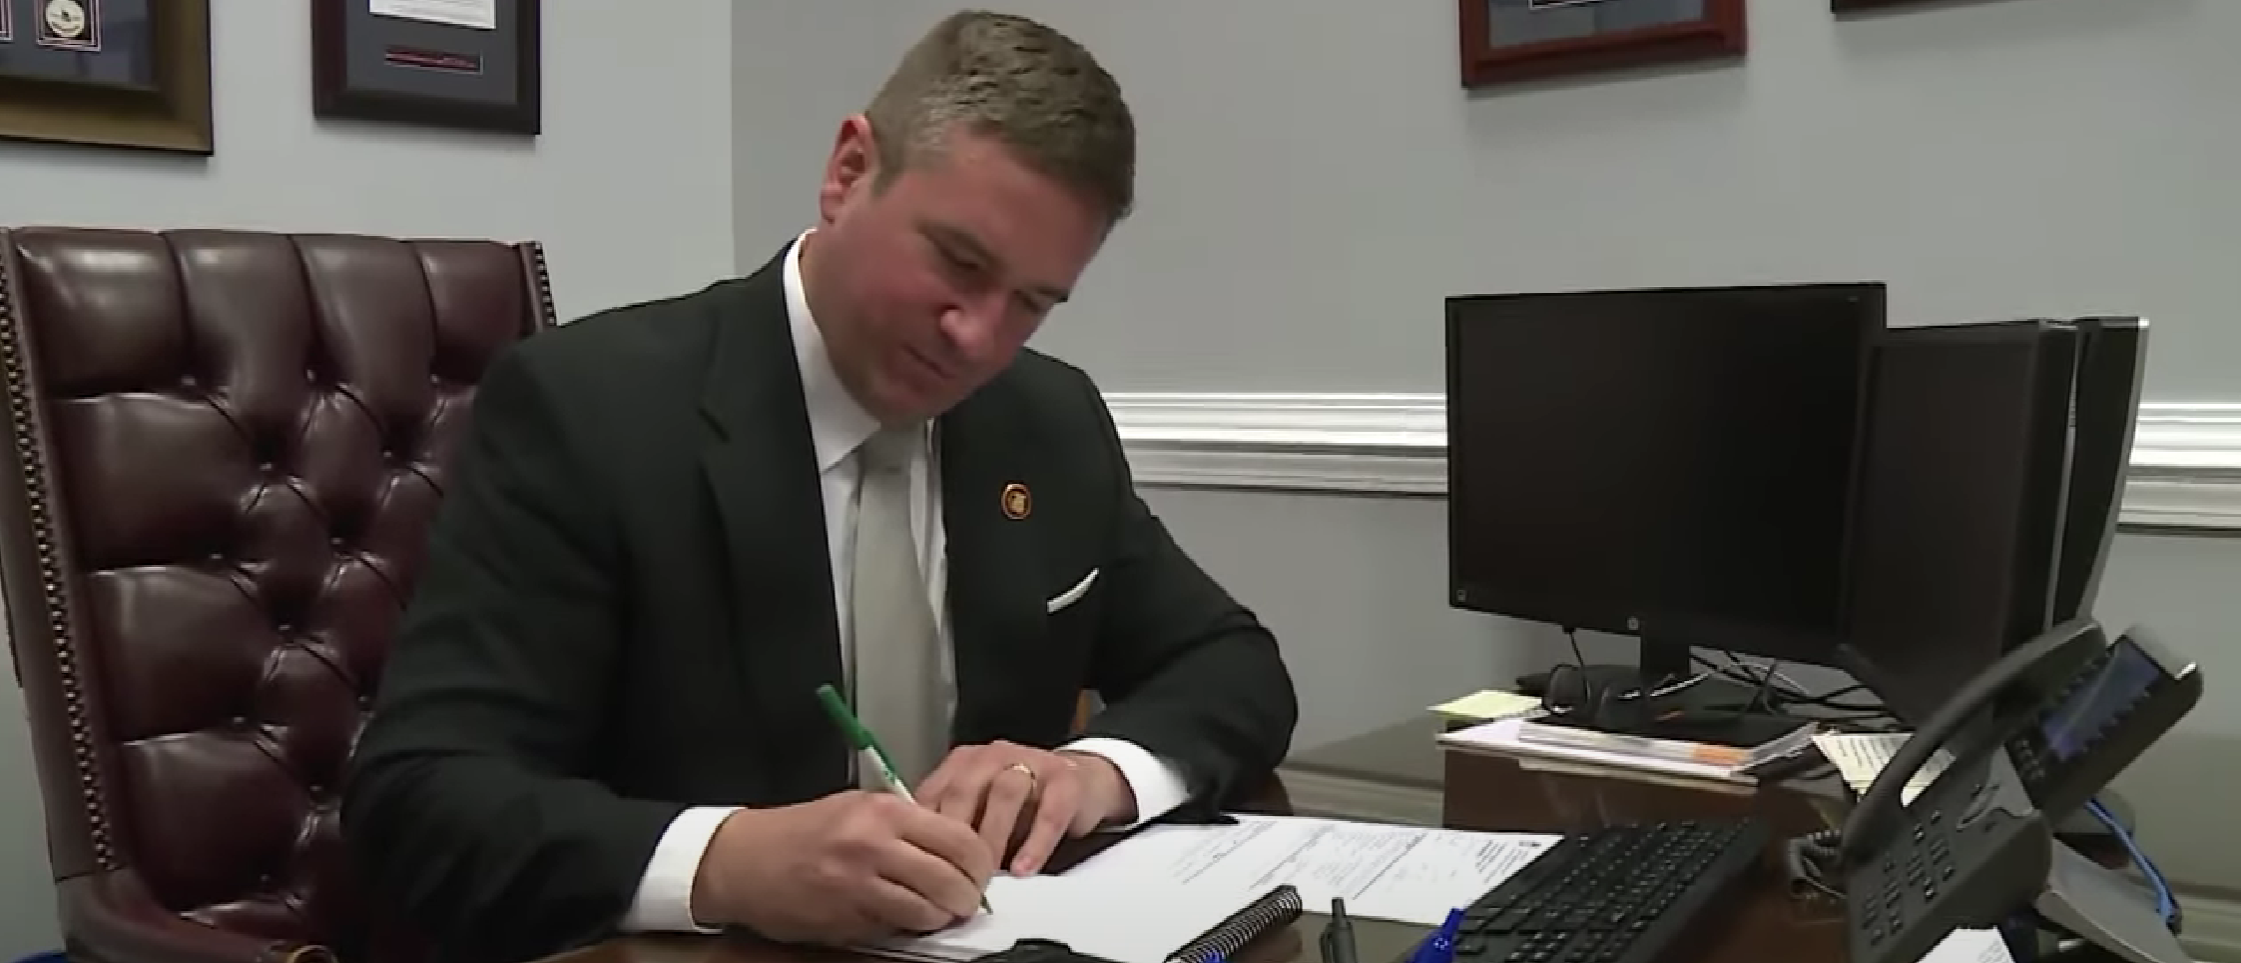 Attorney General Andrew Baily of Missouri, at his desk. Fox 2 St. Louis/YouTube/Screenshot